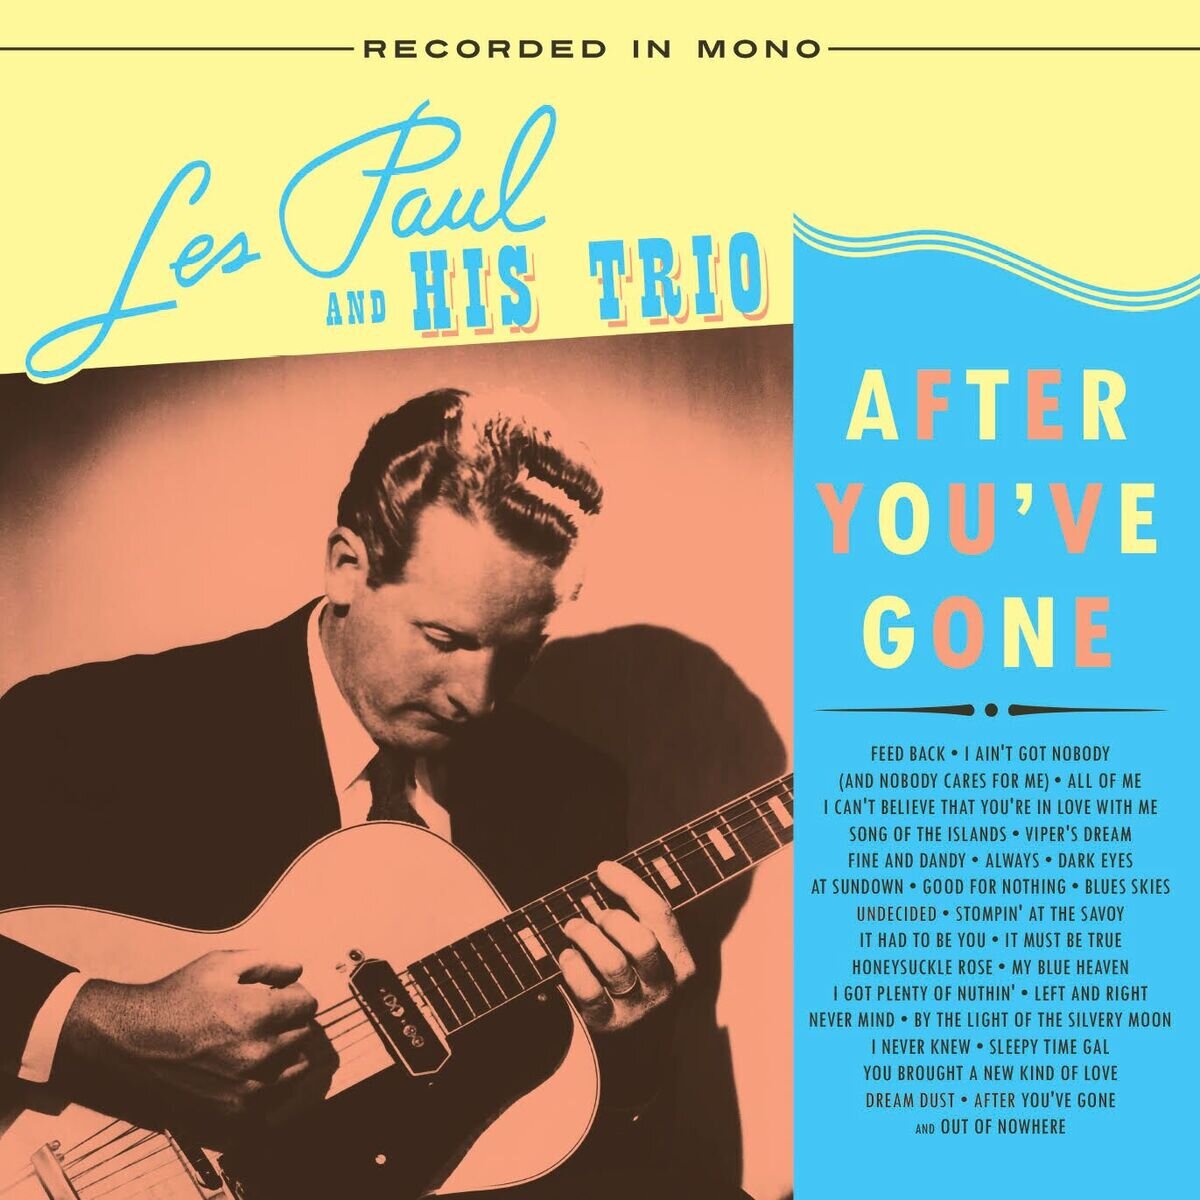 Les Paul and His Trio - After You've Gone (Ultimate History of Tape Echo)